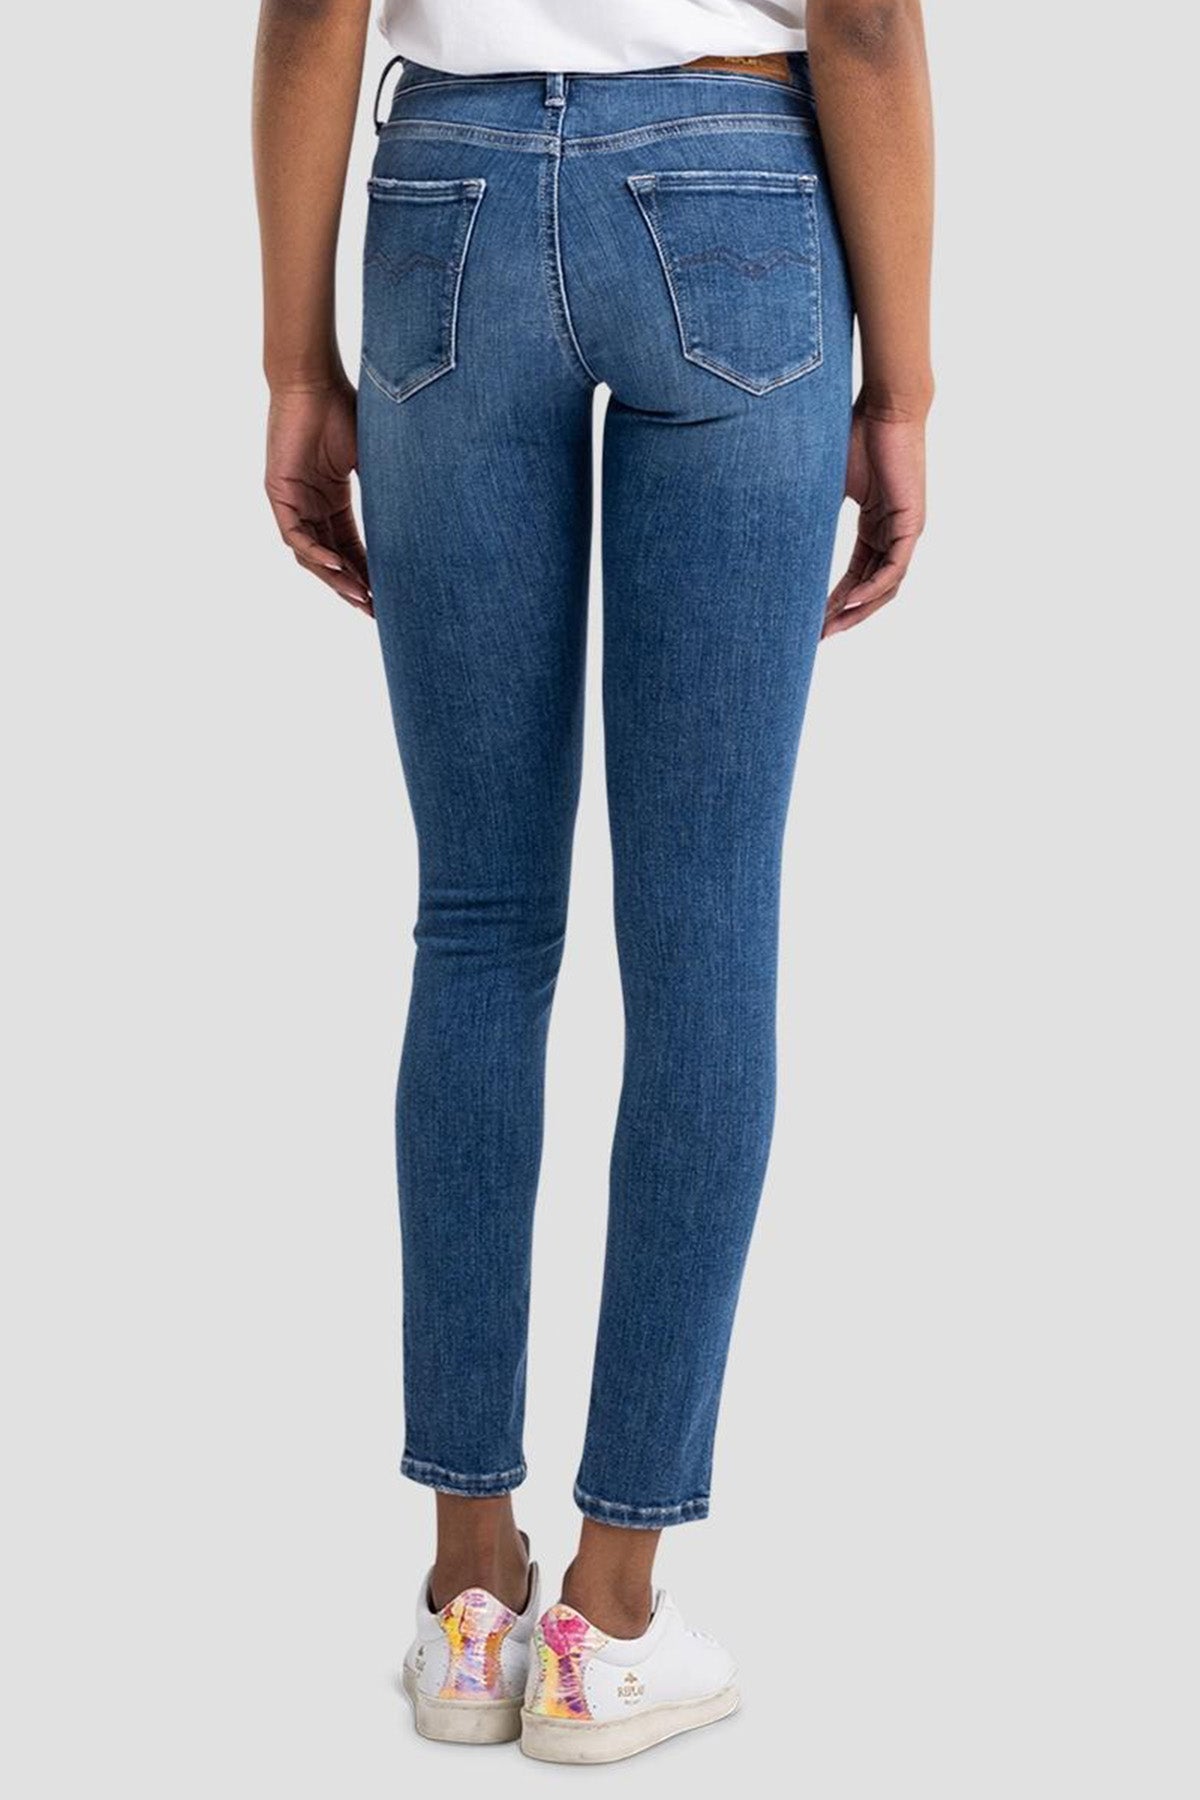 Replay New Luz Skinny Fit Jeans-Libas Trendy Fashion Store